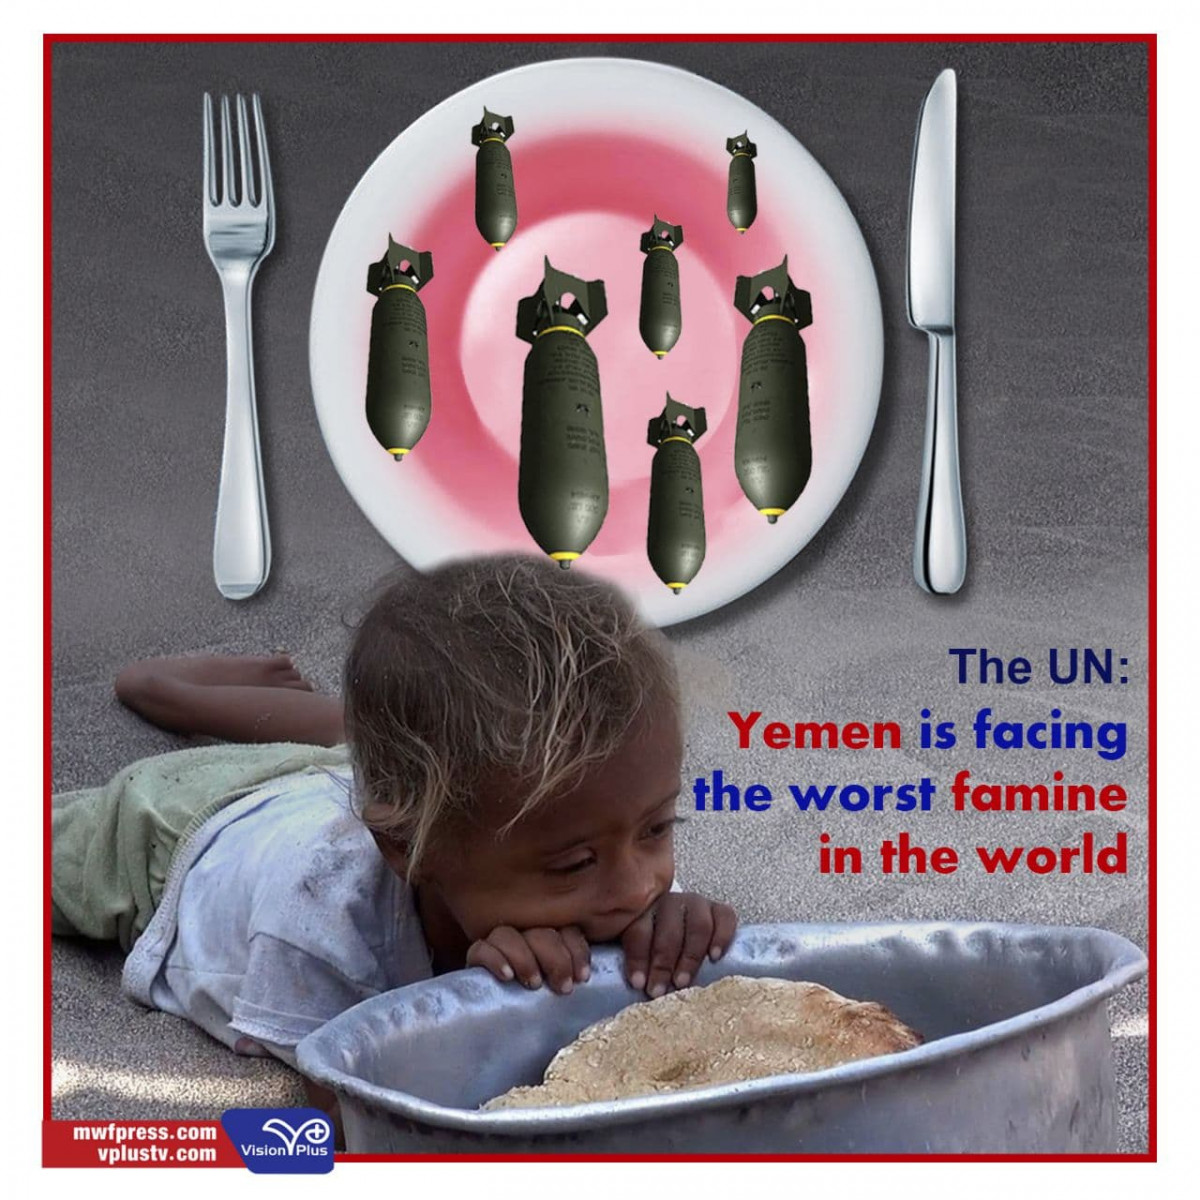 The UN: Yemen is facing the worst famine in the world